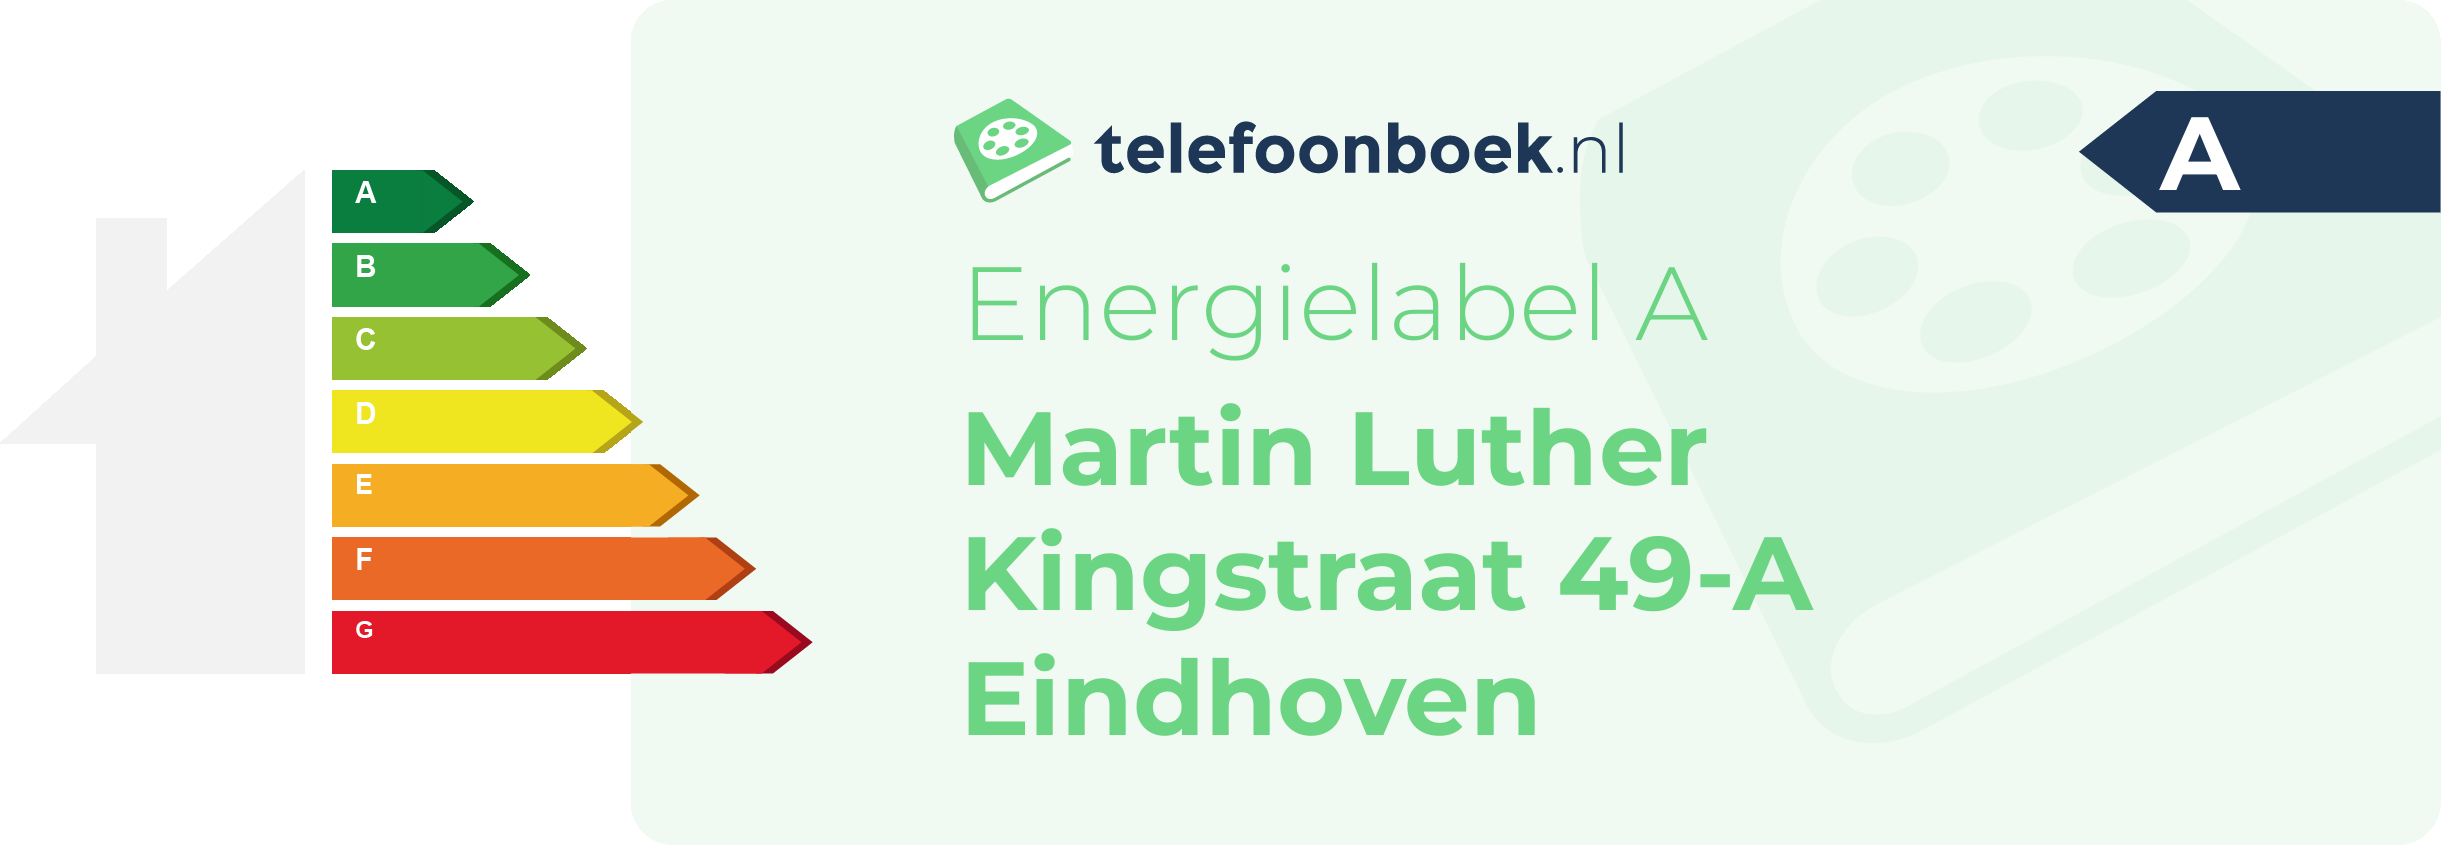 Energielabel Martin Luther Kingstraat 49-A Eindhoven